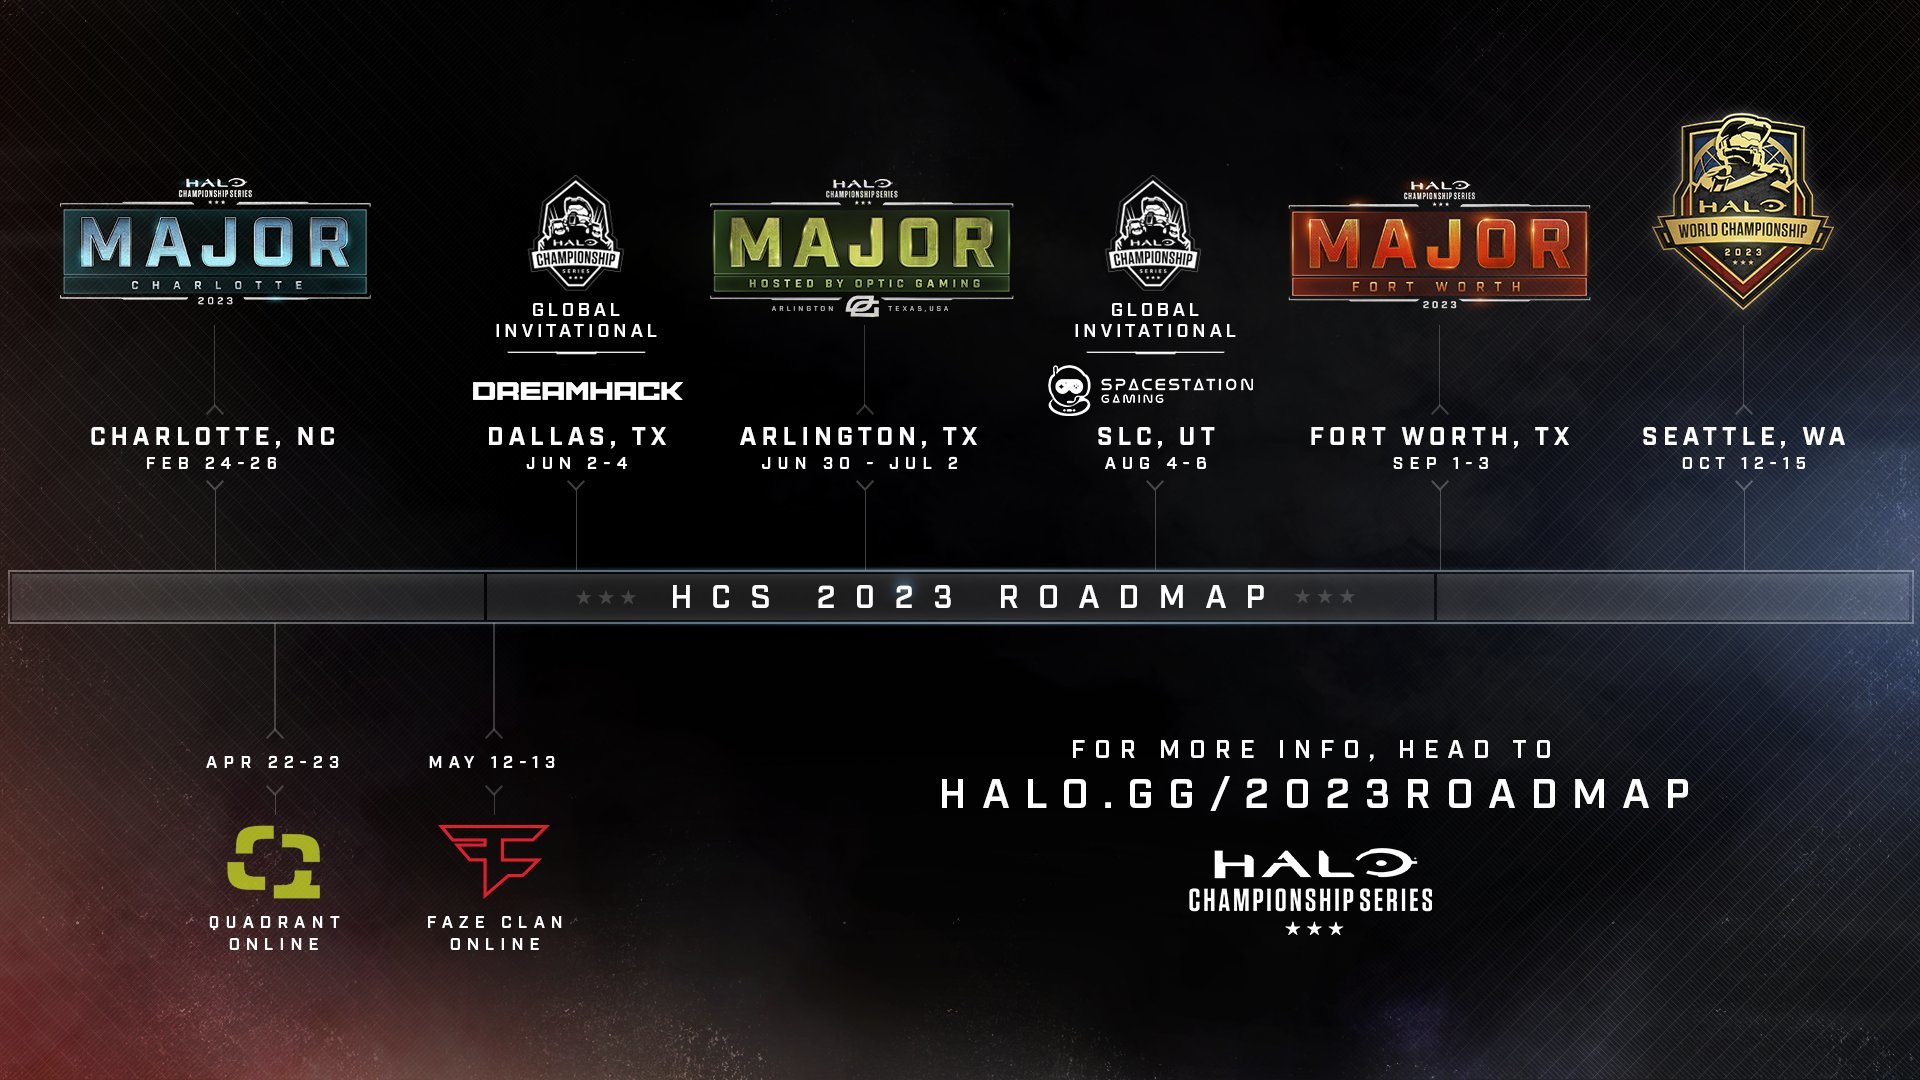 Halo Championship Series 2023 roadmap sets a date for the World Championship - Halo Infinite